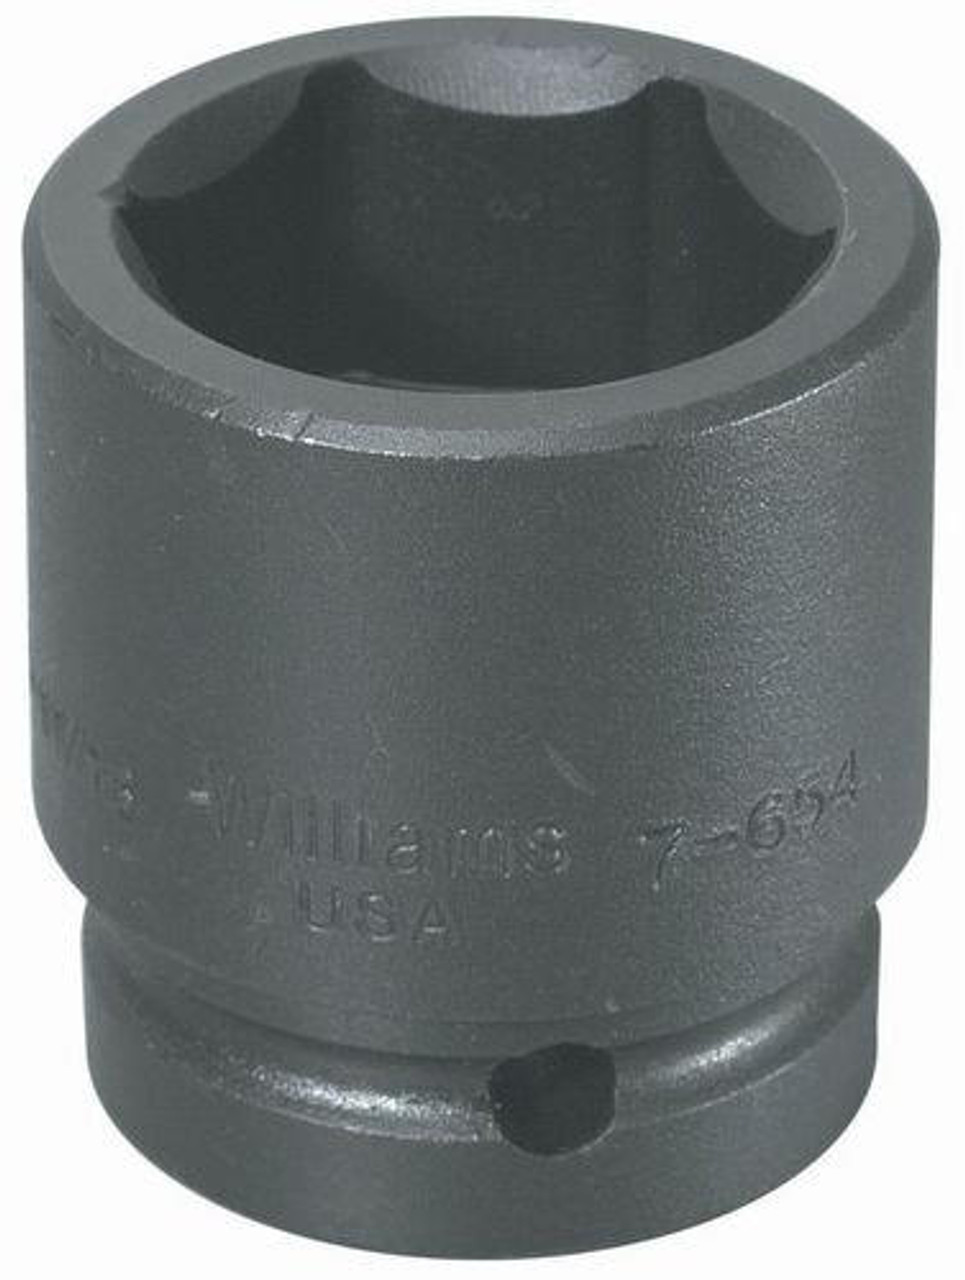 Williams Made In USA 4 5/16" Williams 1" Dr Shallow Impact Socket 6 Pt - 7-6138 